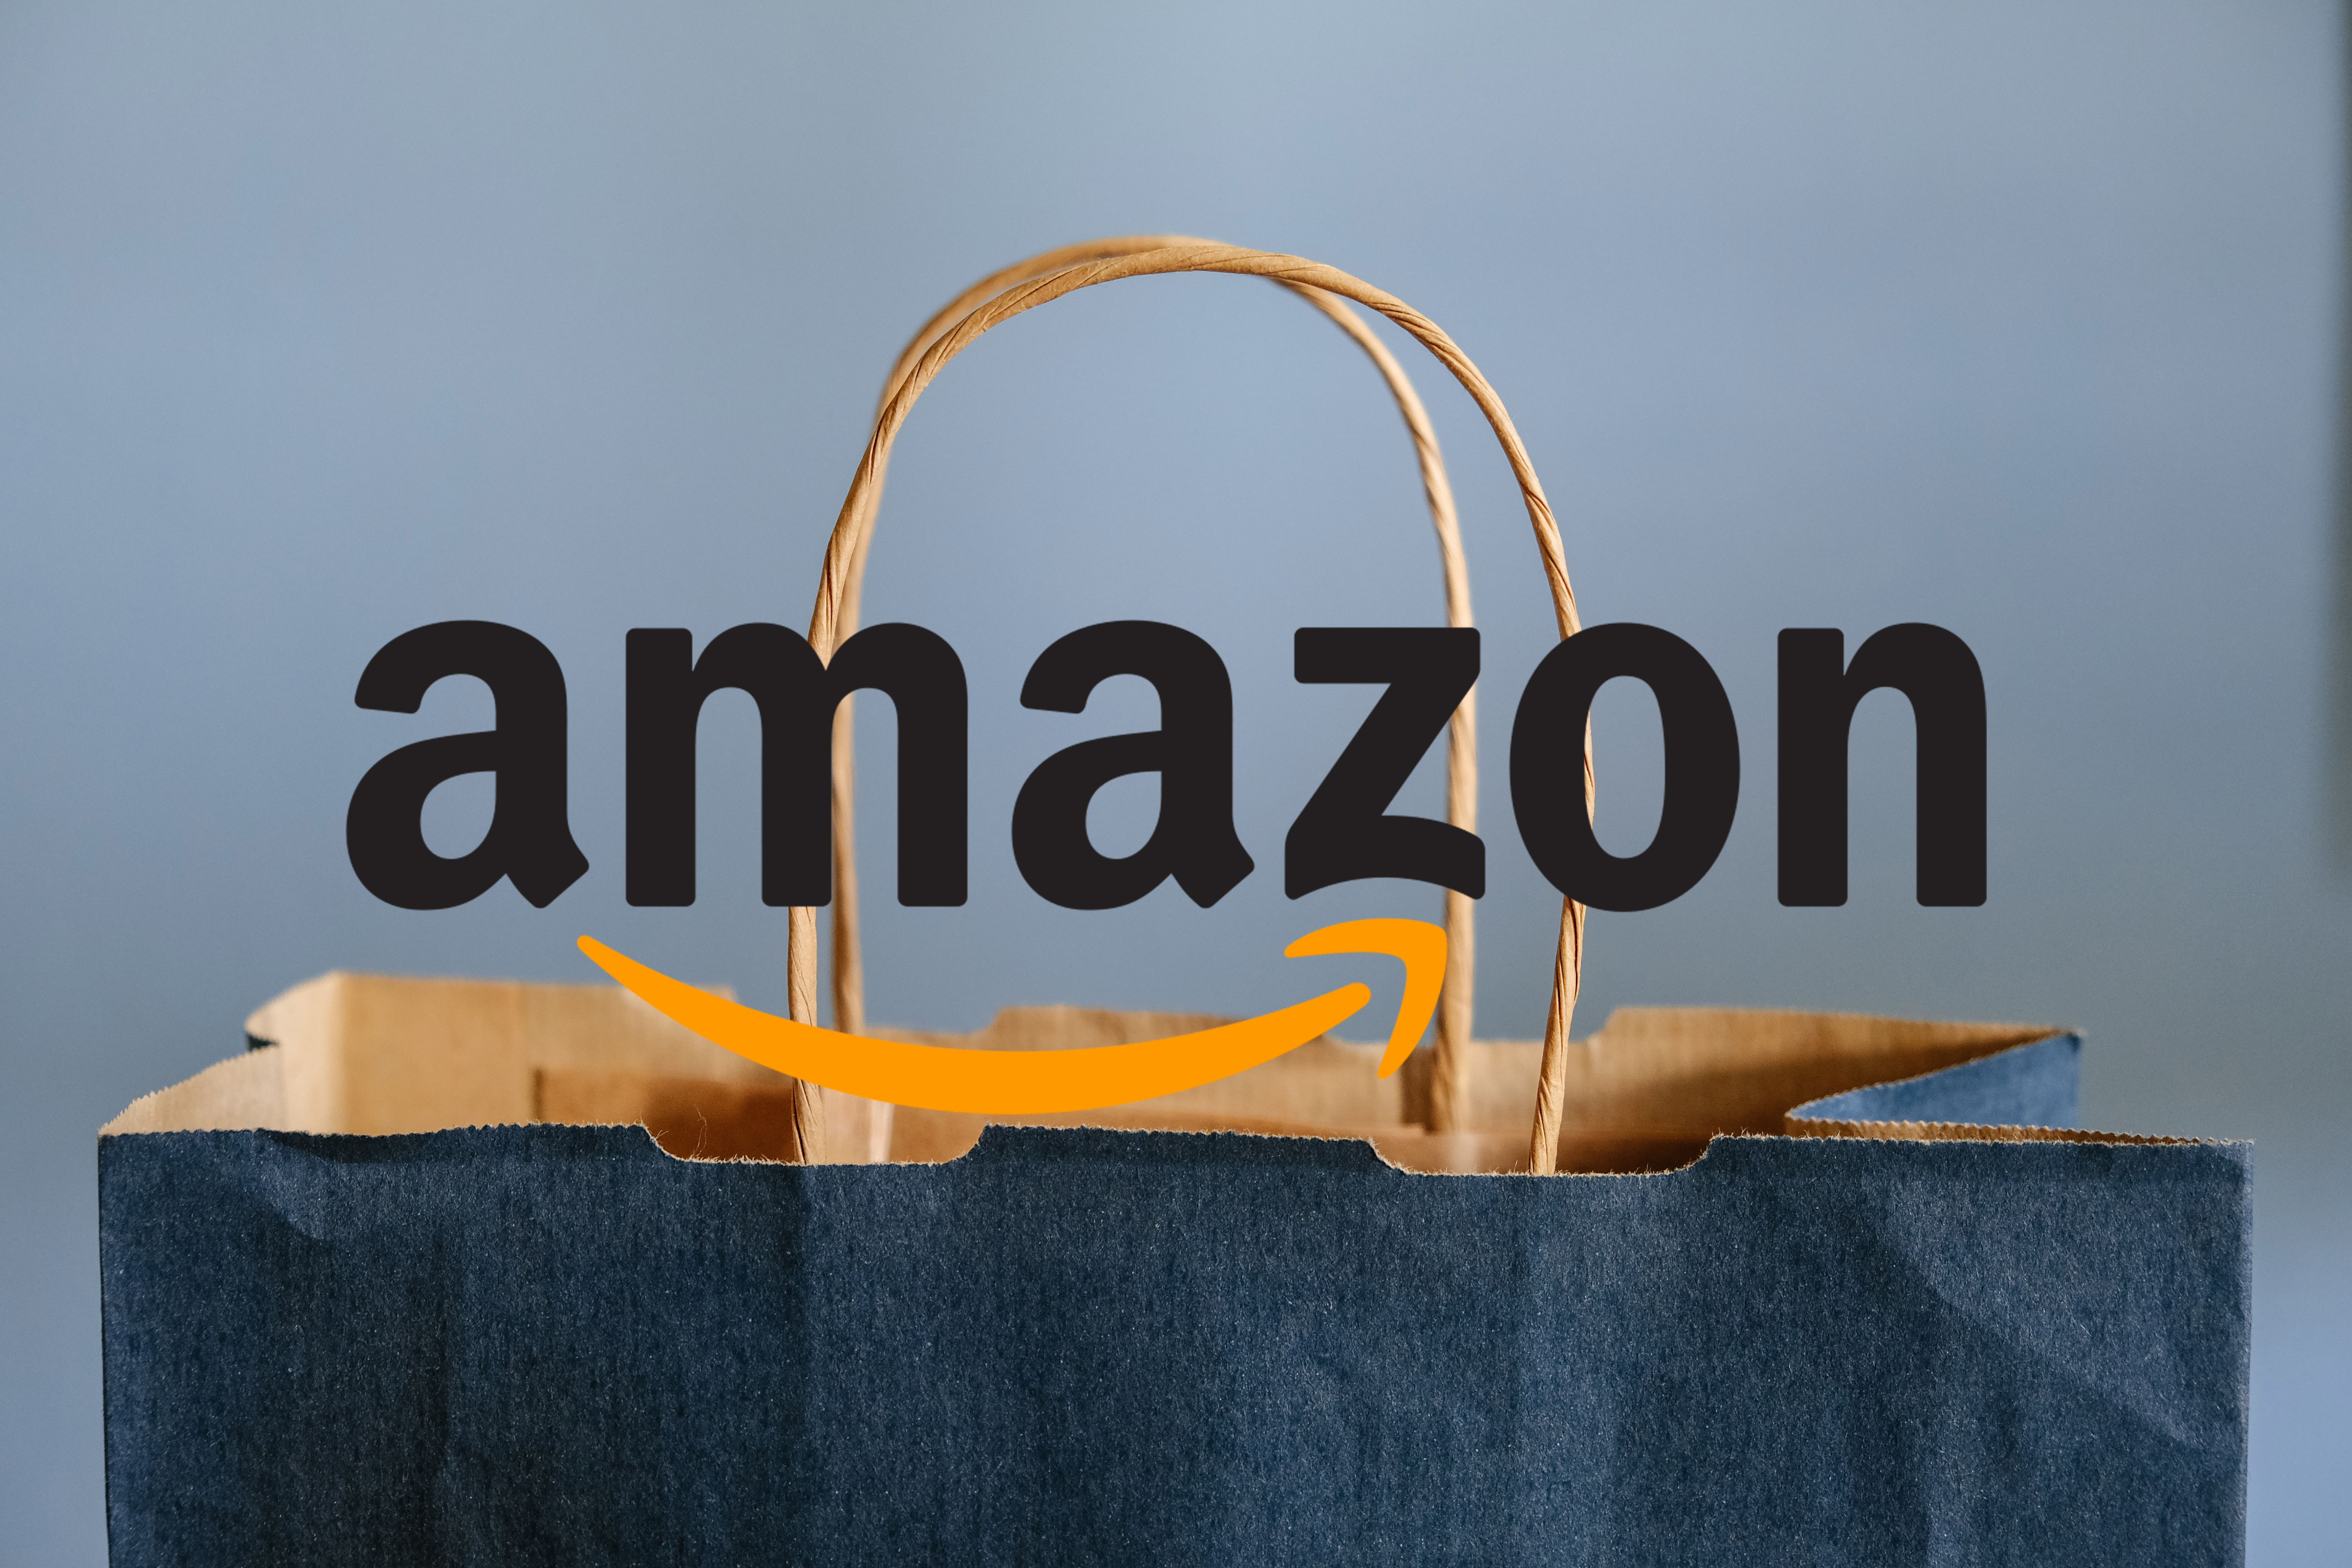 Le coupon promotionnel Amazon - startup-bootcamp.fr